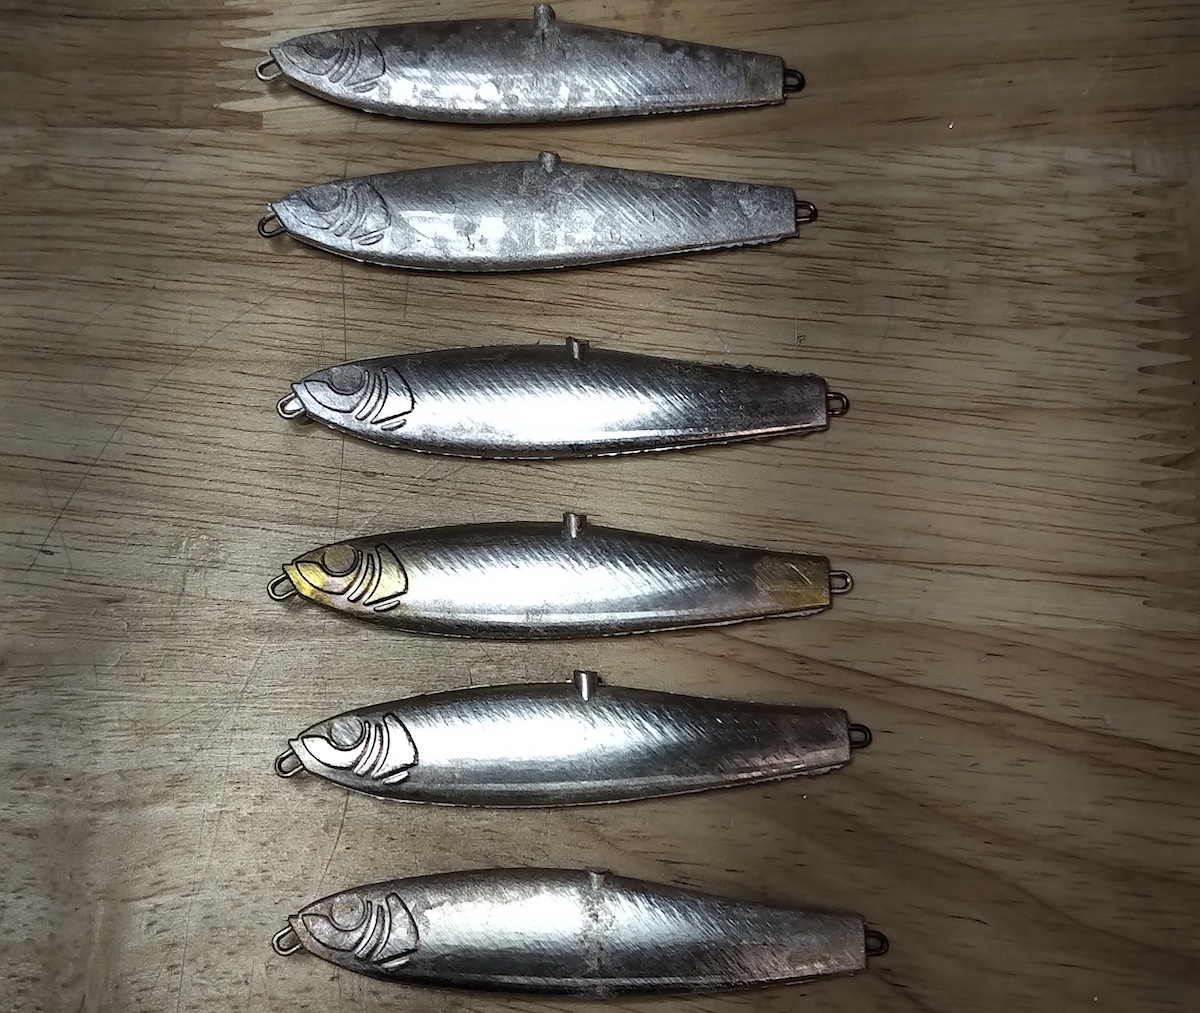 Lure blanks with relief